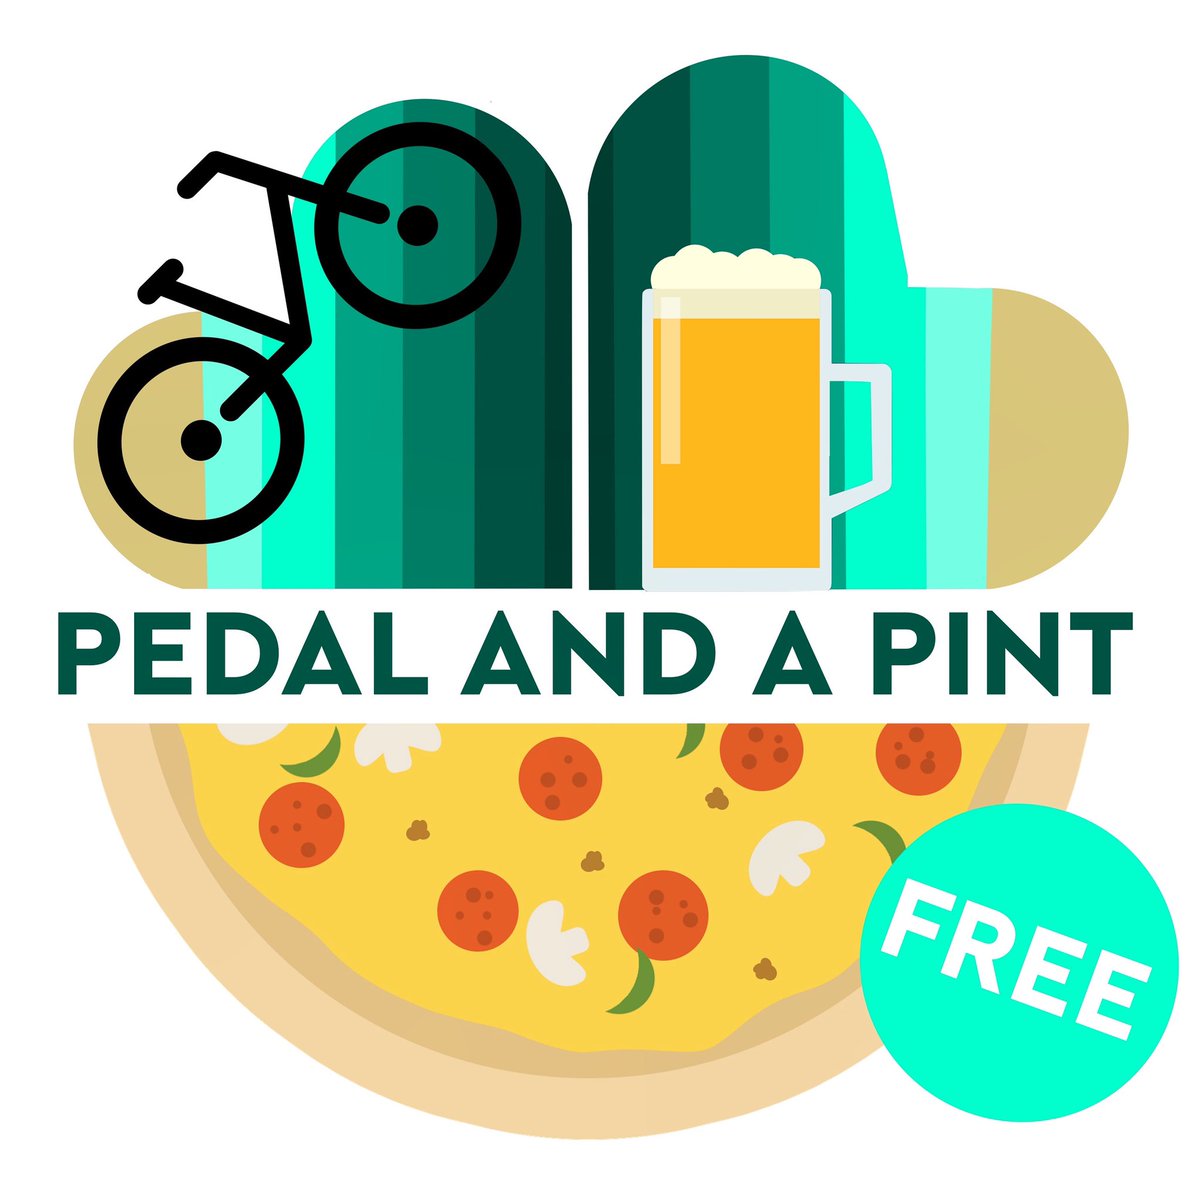 Bike adventures shouldn’t end when you’re no longer a kid… on Thurs 30th June you’re invited to our 1st pedalling potter ending somewhere in #greatyarmouth for a pint.

Whatever your bike, whether you ride slow or slower, you’re welcome. Meet Estcourt Rd at 6.30 #bigbikerevival